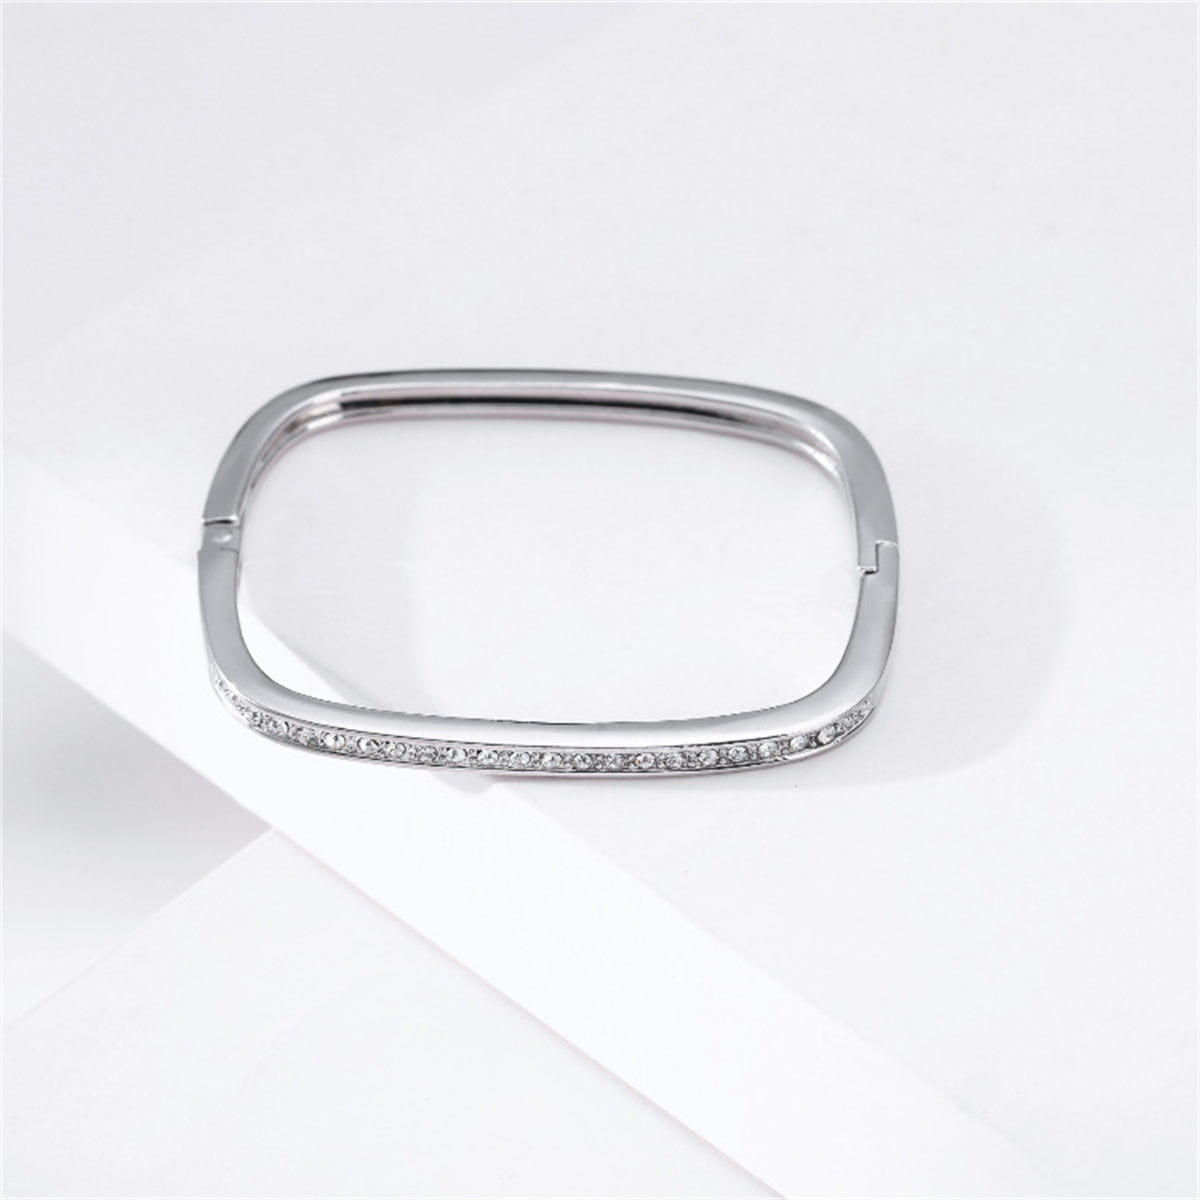 Cubic Zirconia & Silver-Plated Thin Square Bangle